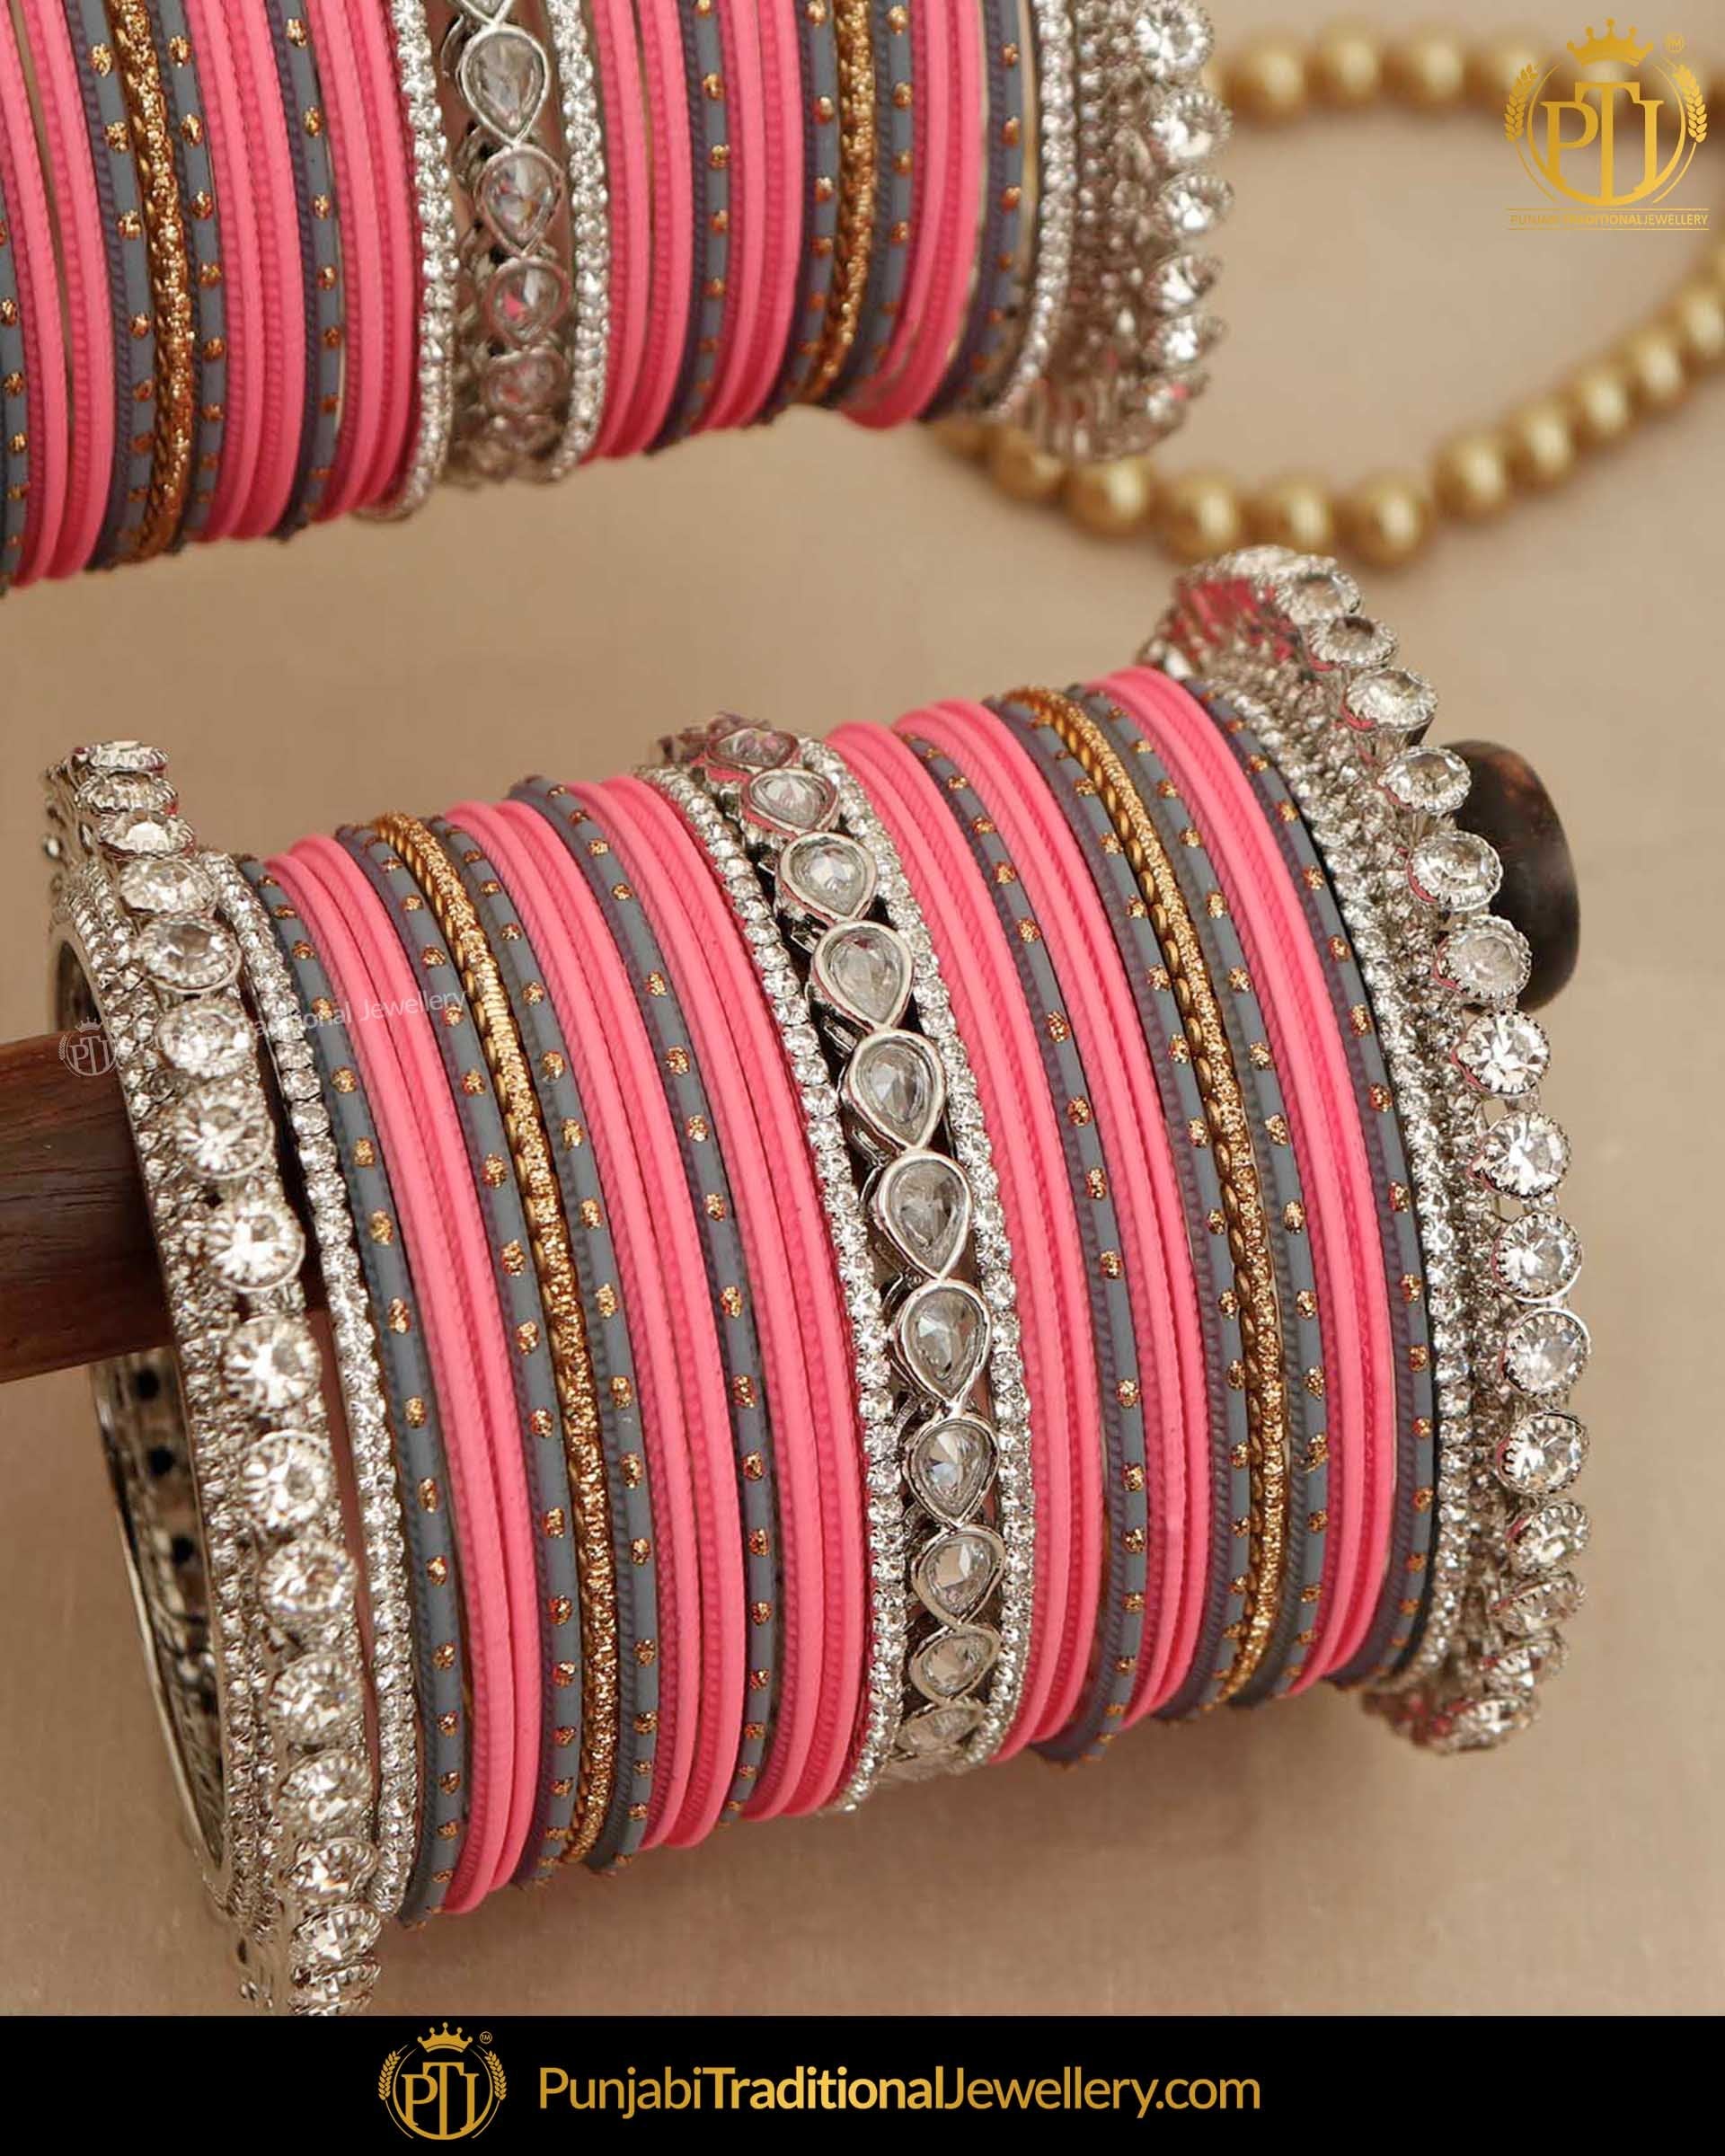 Bangles: Why Do Indian Women Wear Them? - The Caratlane